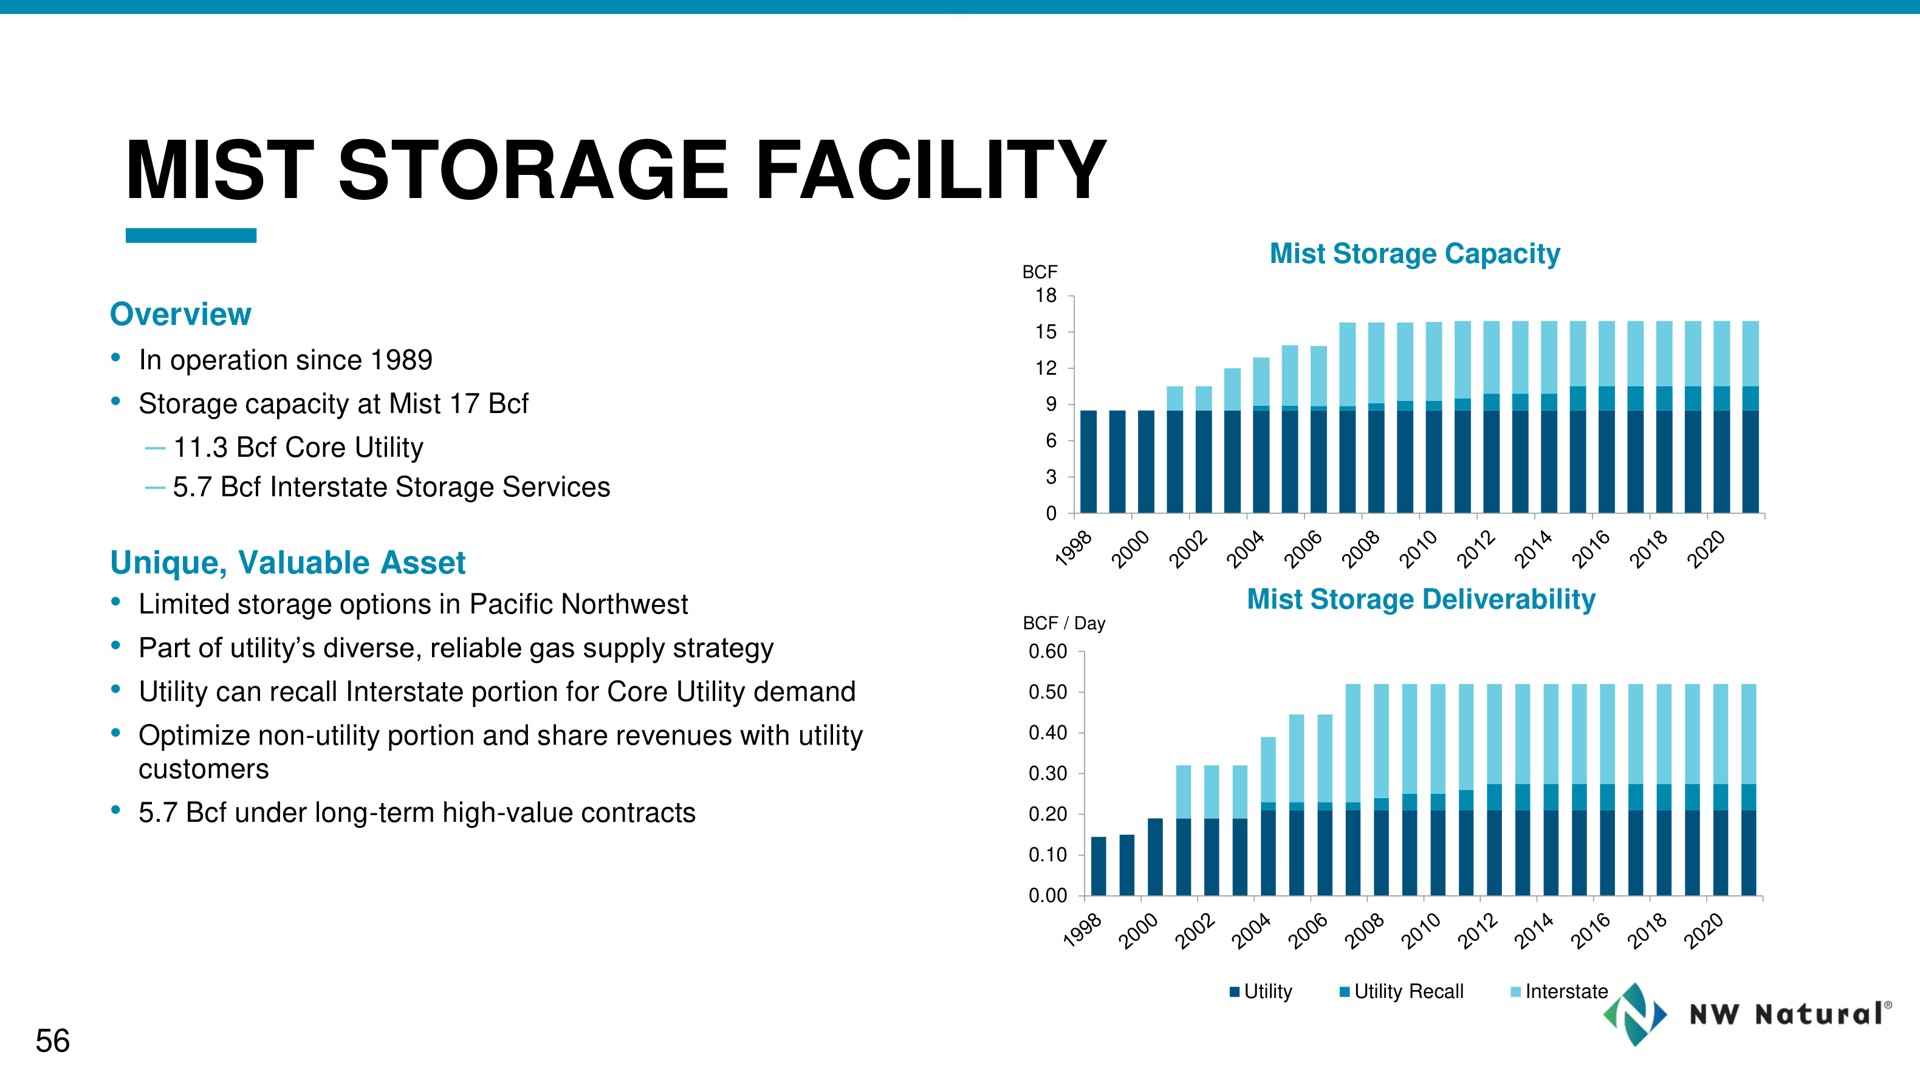 mist storage facility | NW Natural Holdings